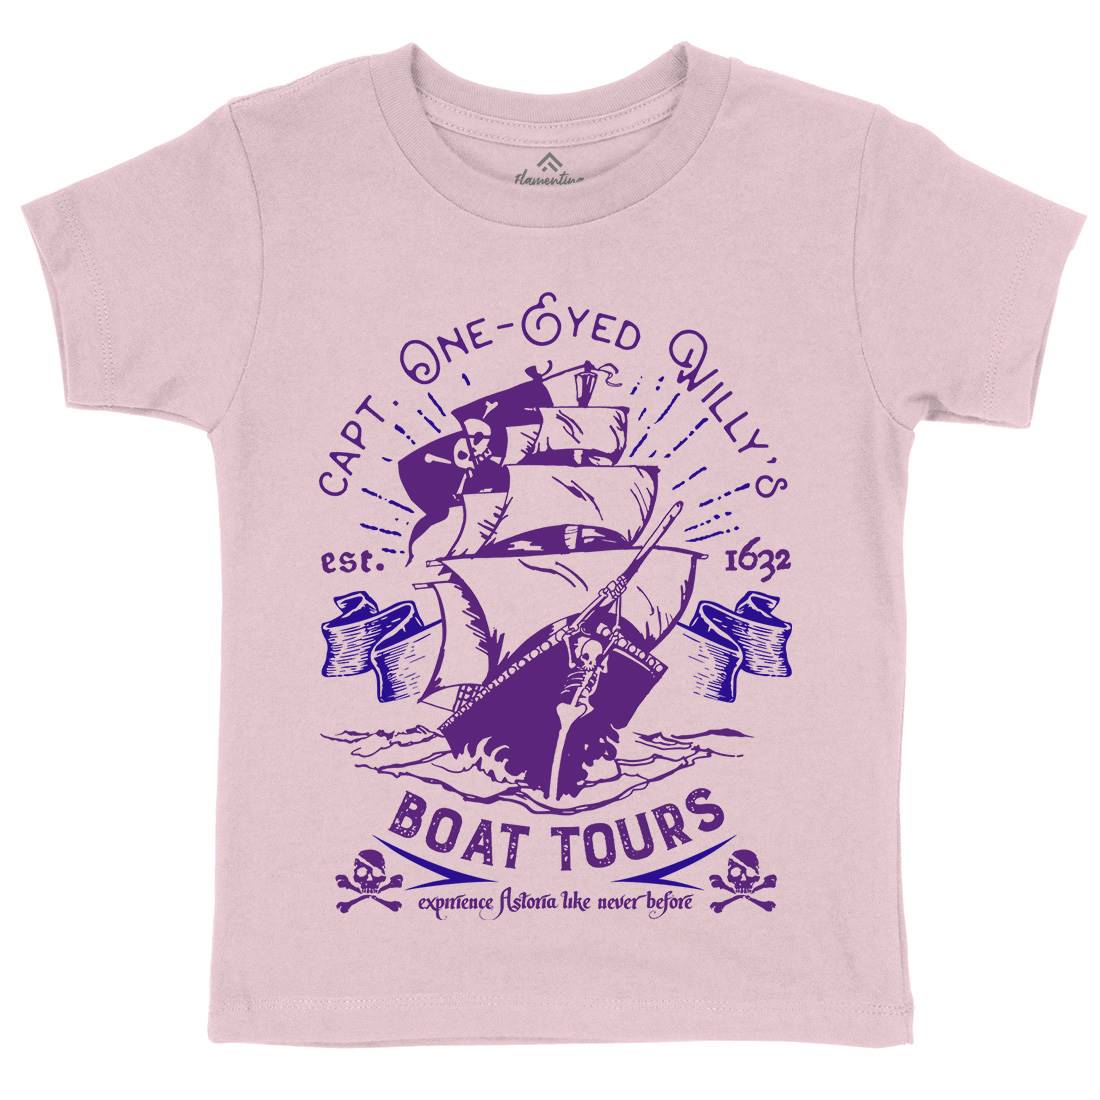 One-Eyed Willys Boat Tours Kids Crew Neck T-Shirt Horror D160